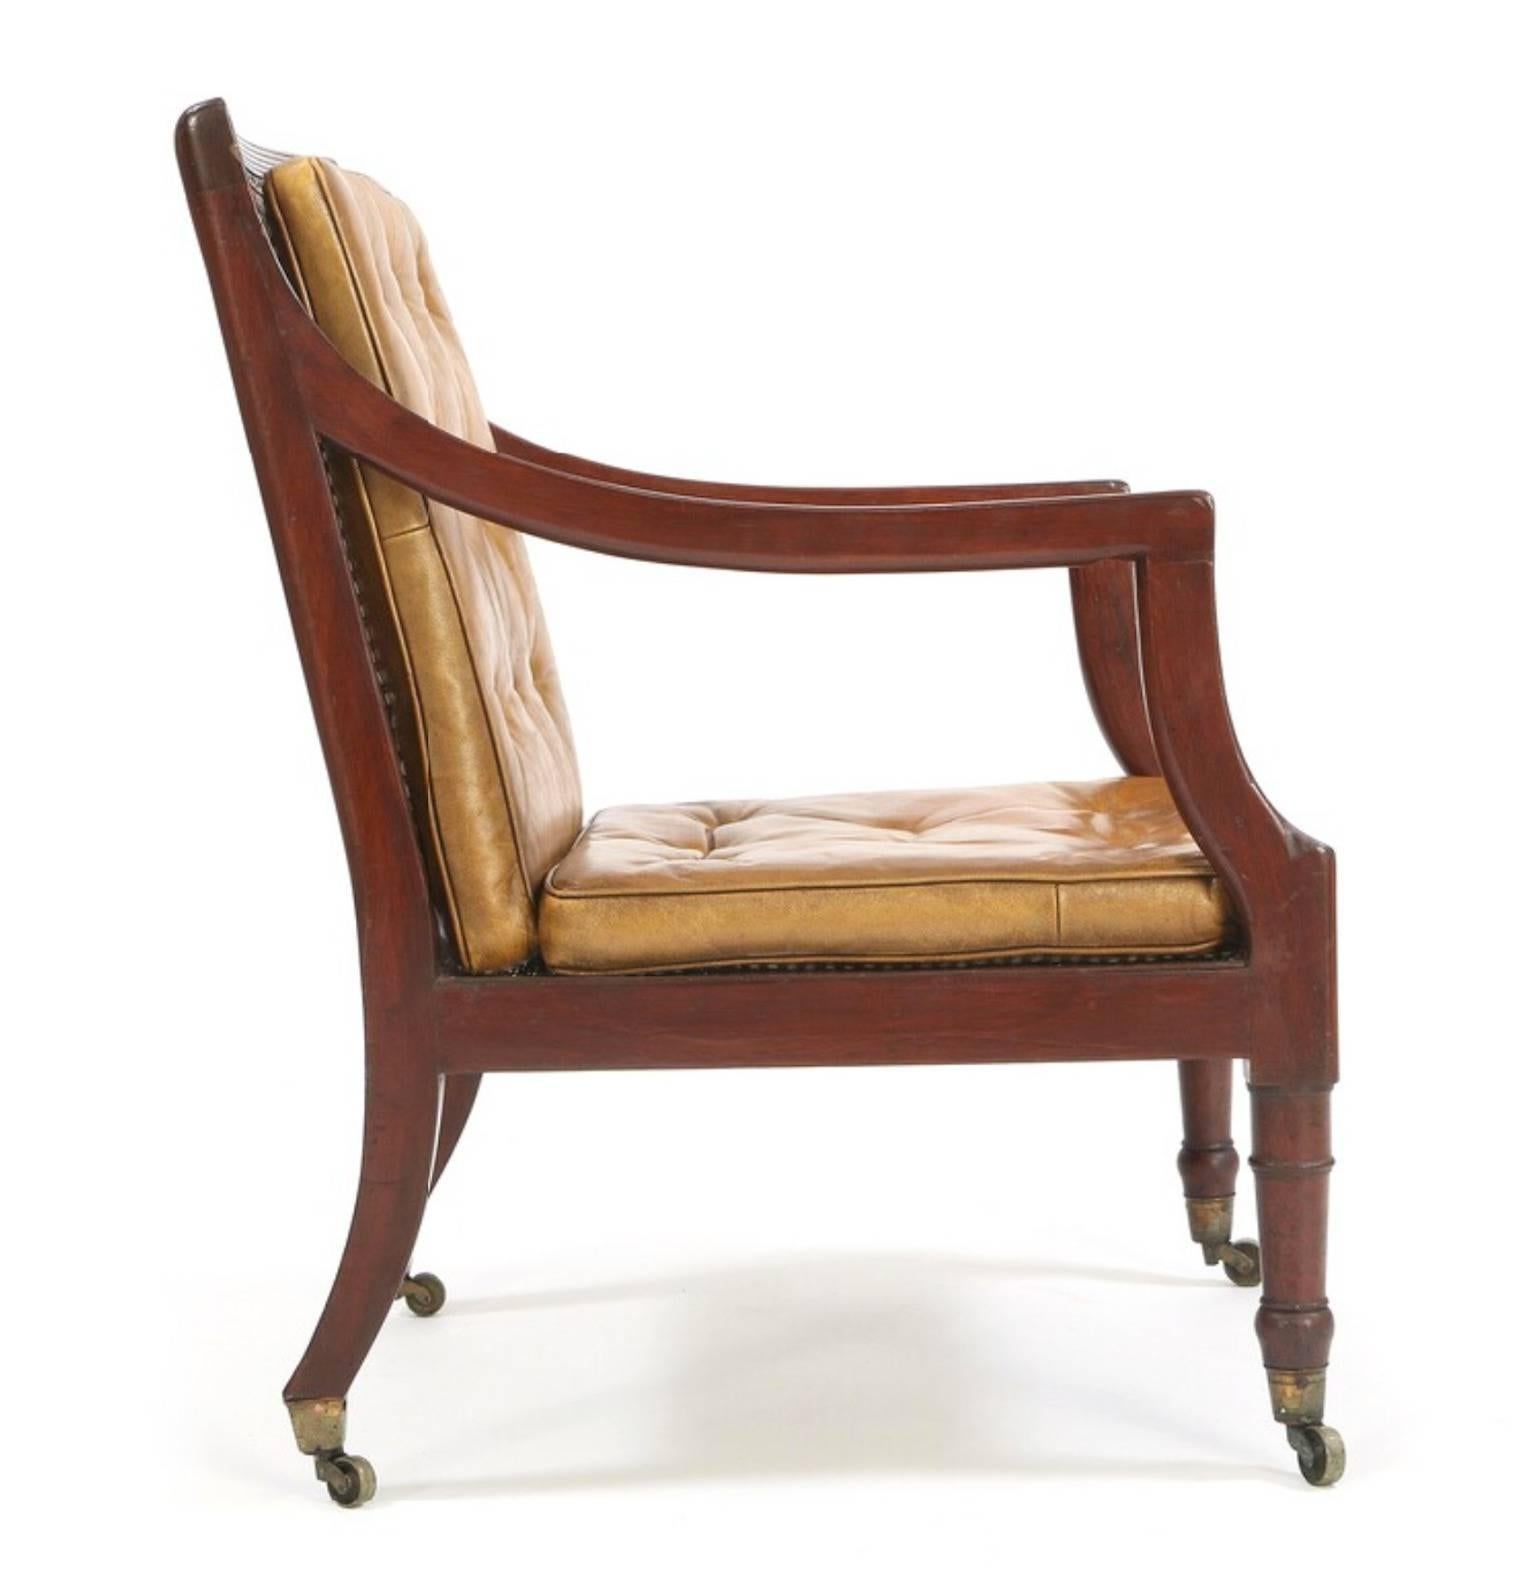 Fine George III, early English Regency period, circa 1800 armchair or library chair of elegant, clean design having solid mahogany frame with rectangular caned back, open arms, and caned seat with loose tufted leather cushions on turned front legs